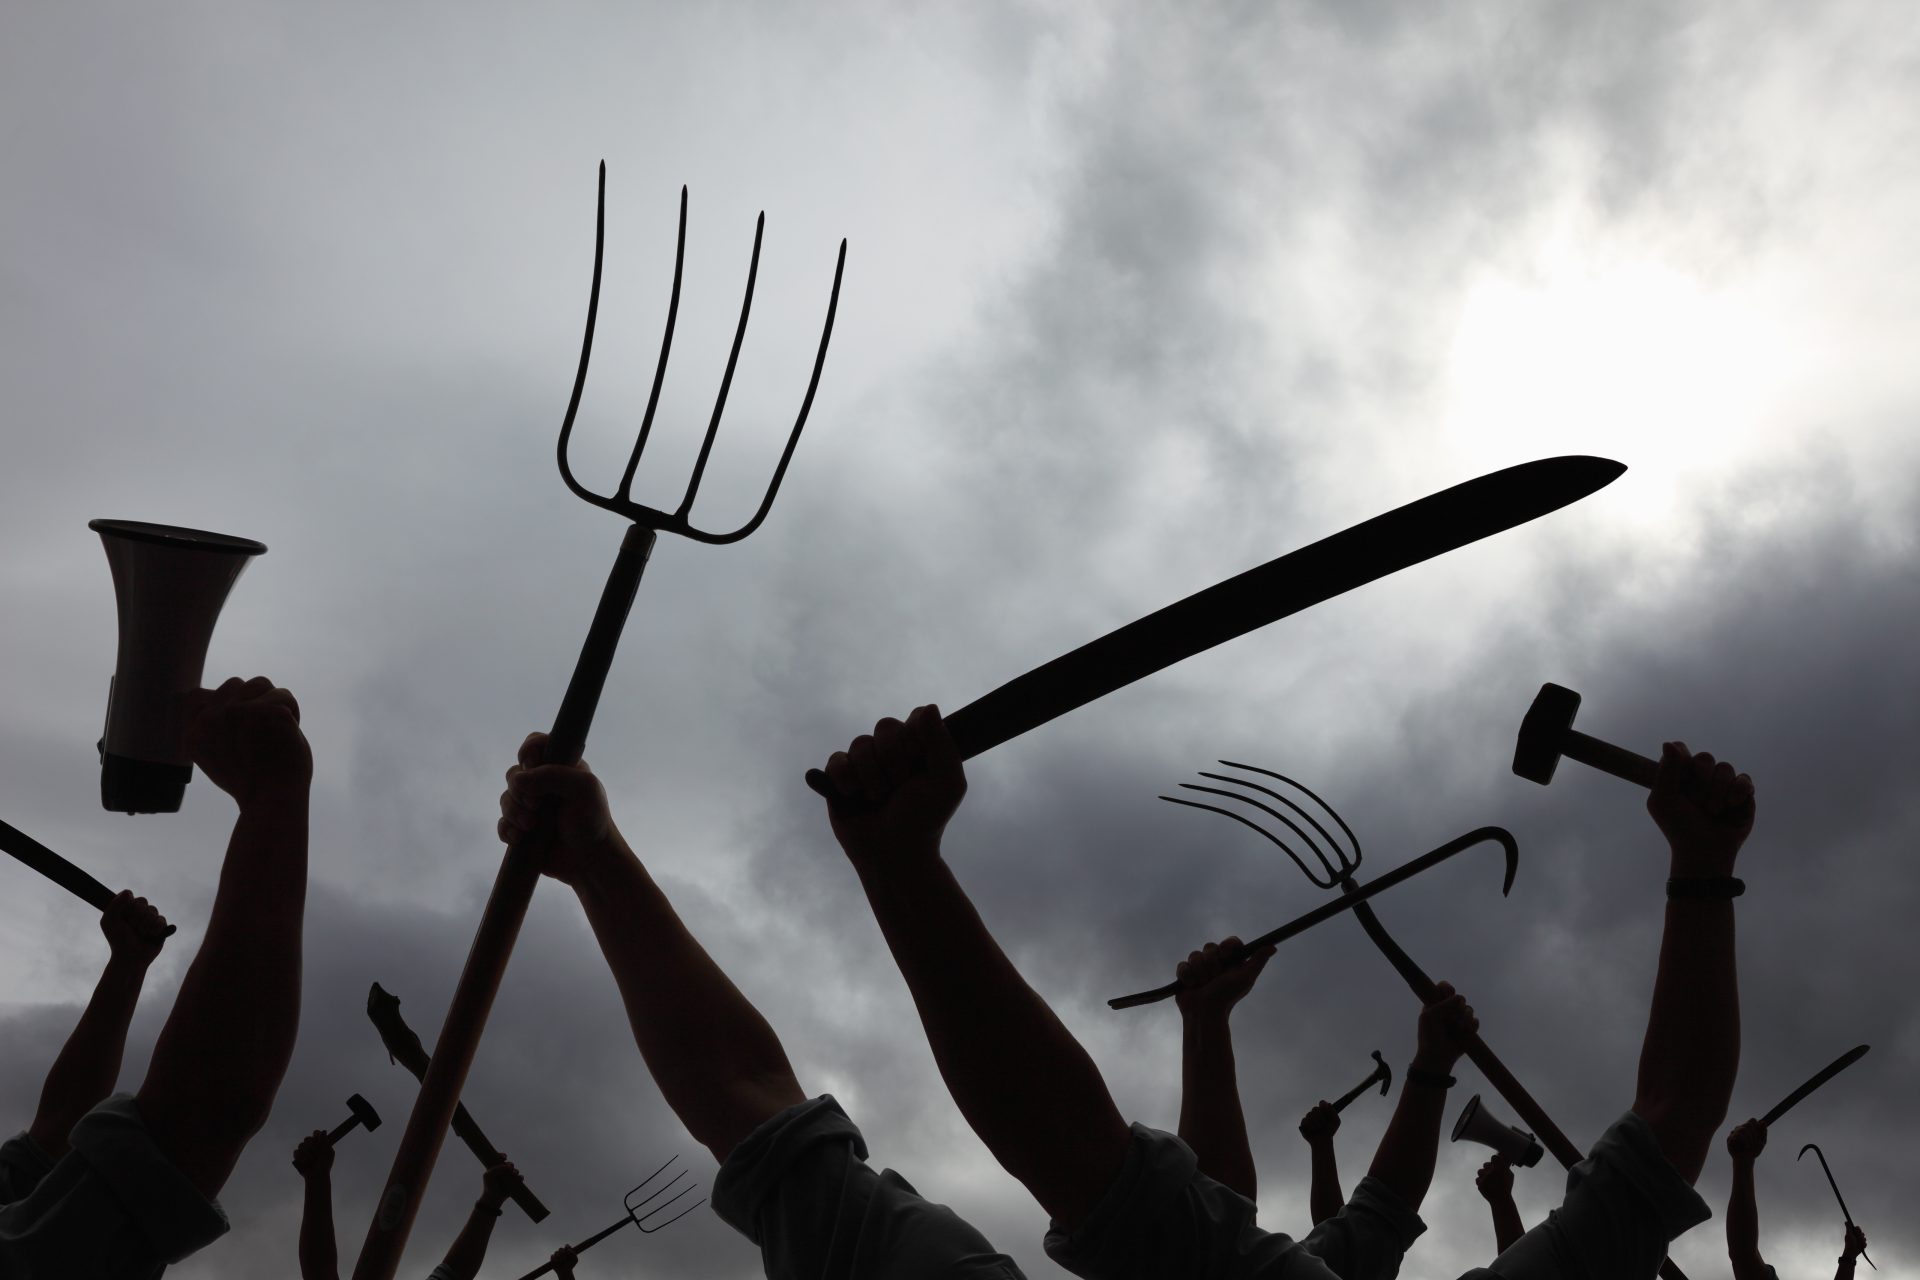 The pitchforks are coming? It threatens the stability of societies